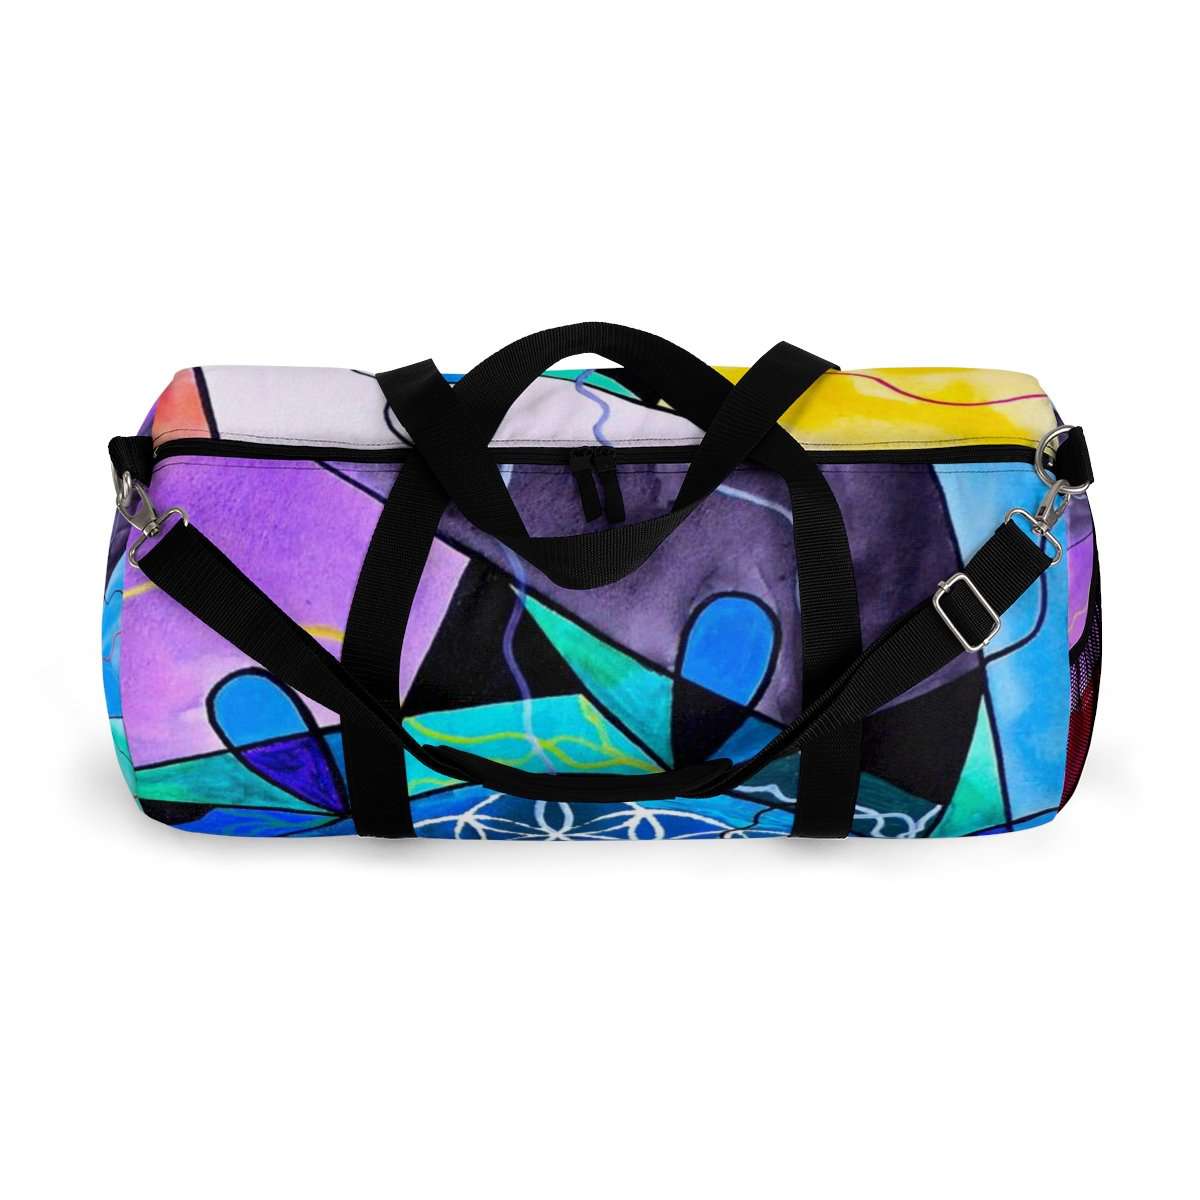 the-official-source-for-the-flower-of-life-duffle-bag-online_10.jpg